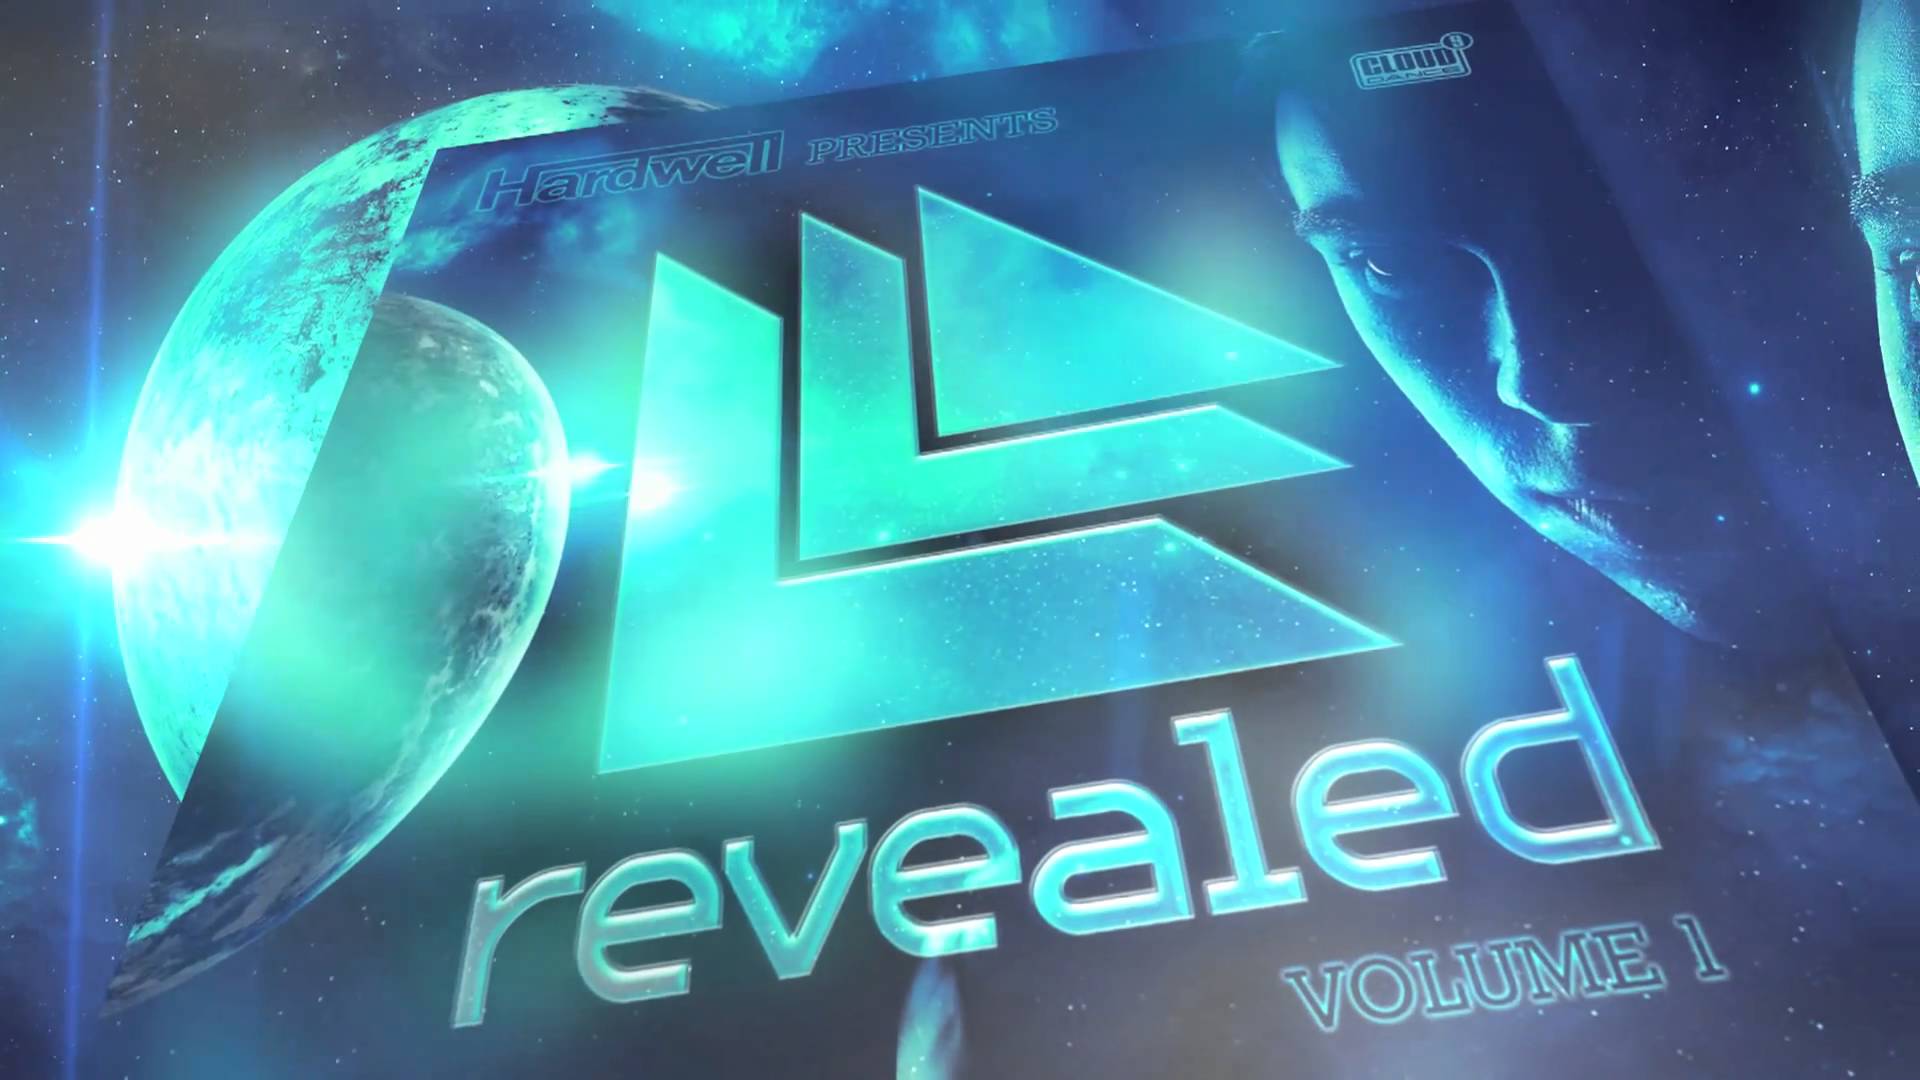 Hardwell presents Revealed Volume 1 [Commercial]